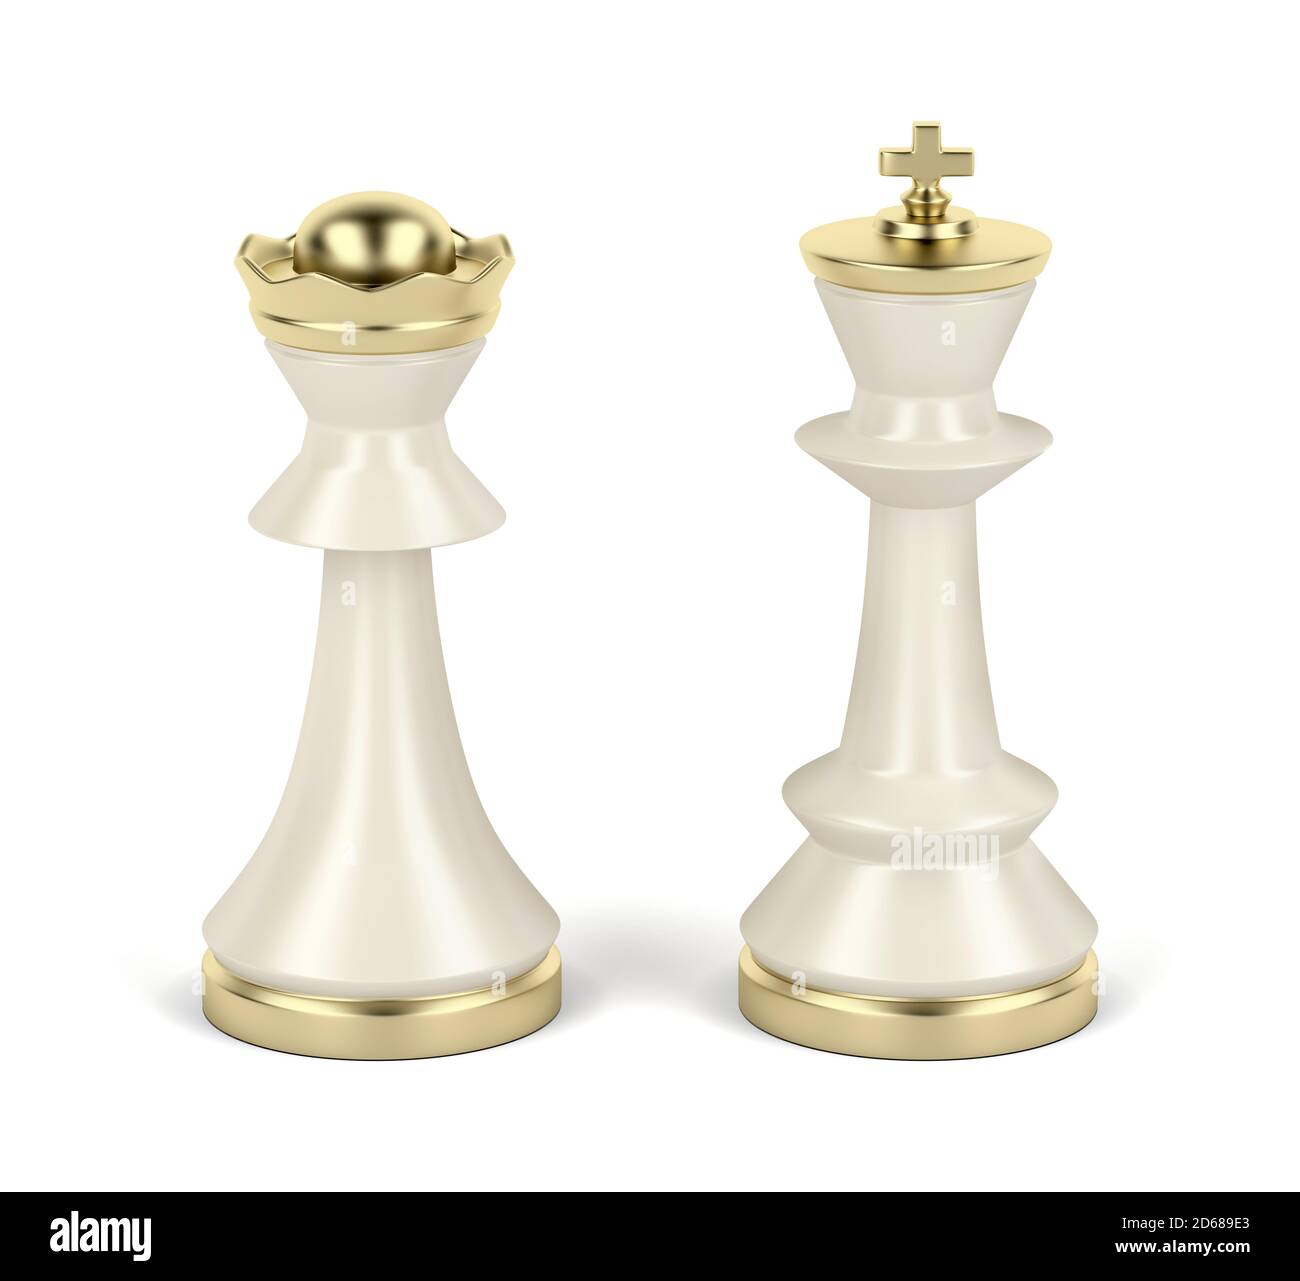 Chess King Piece And Queen Over A White Background Stock Photo, Picture and  Royalty Free Image. Image 52414472.